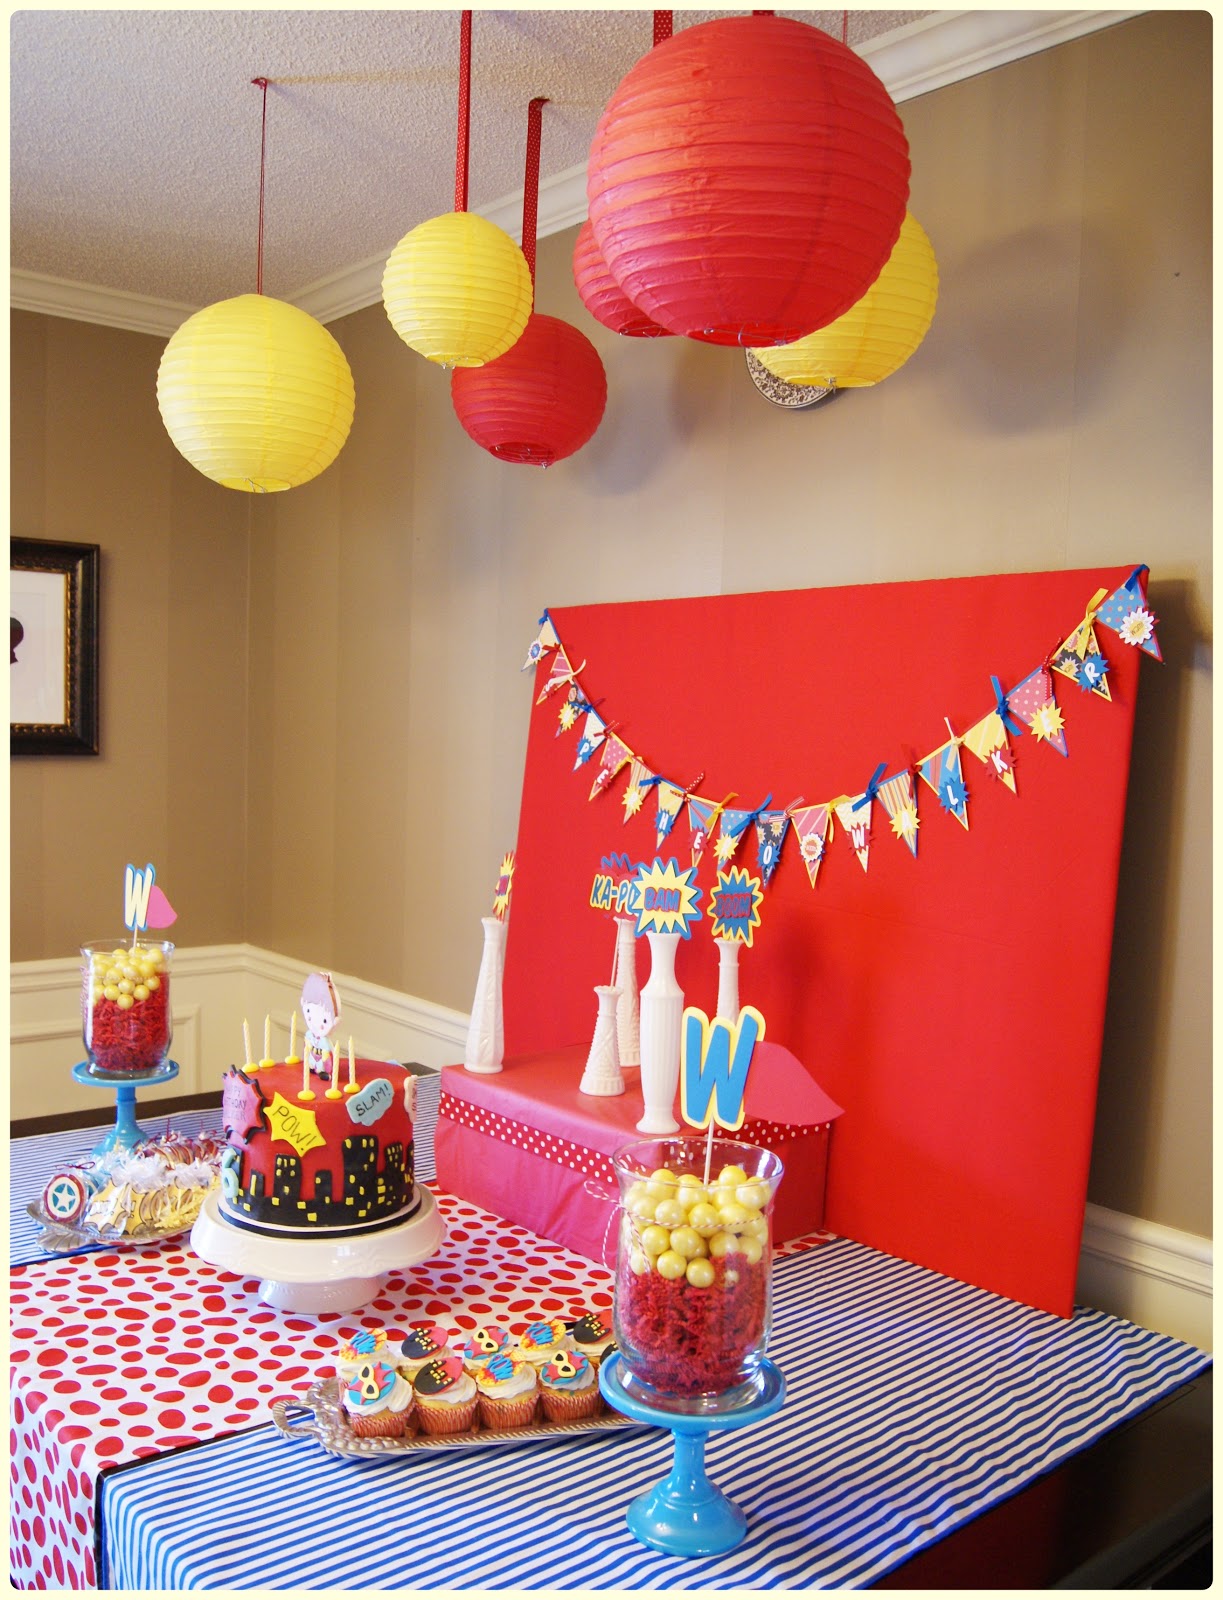 Guest Party: How to Style a Captain America Birthday Party - The Party ...